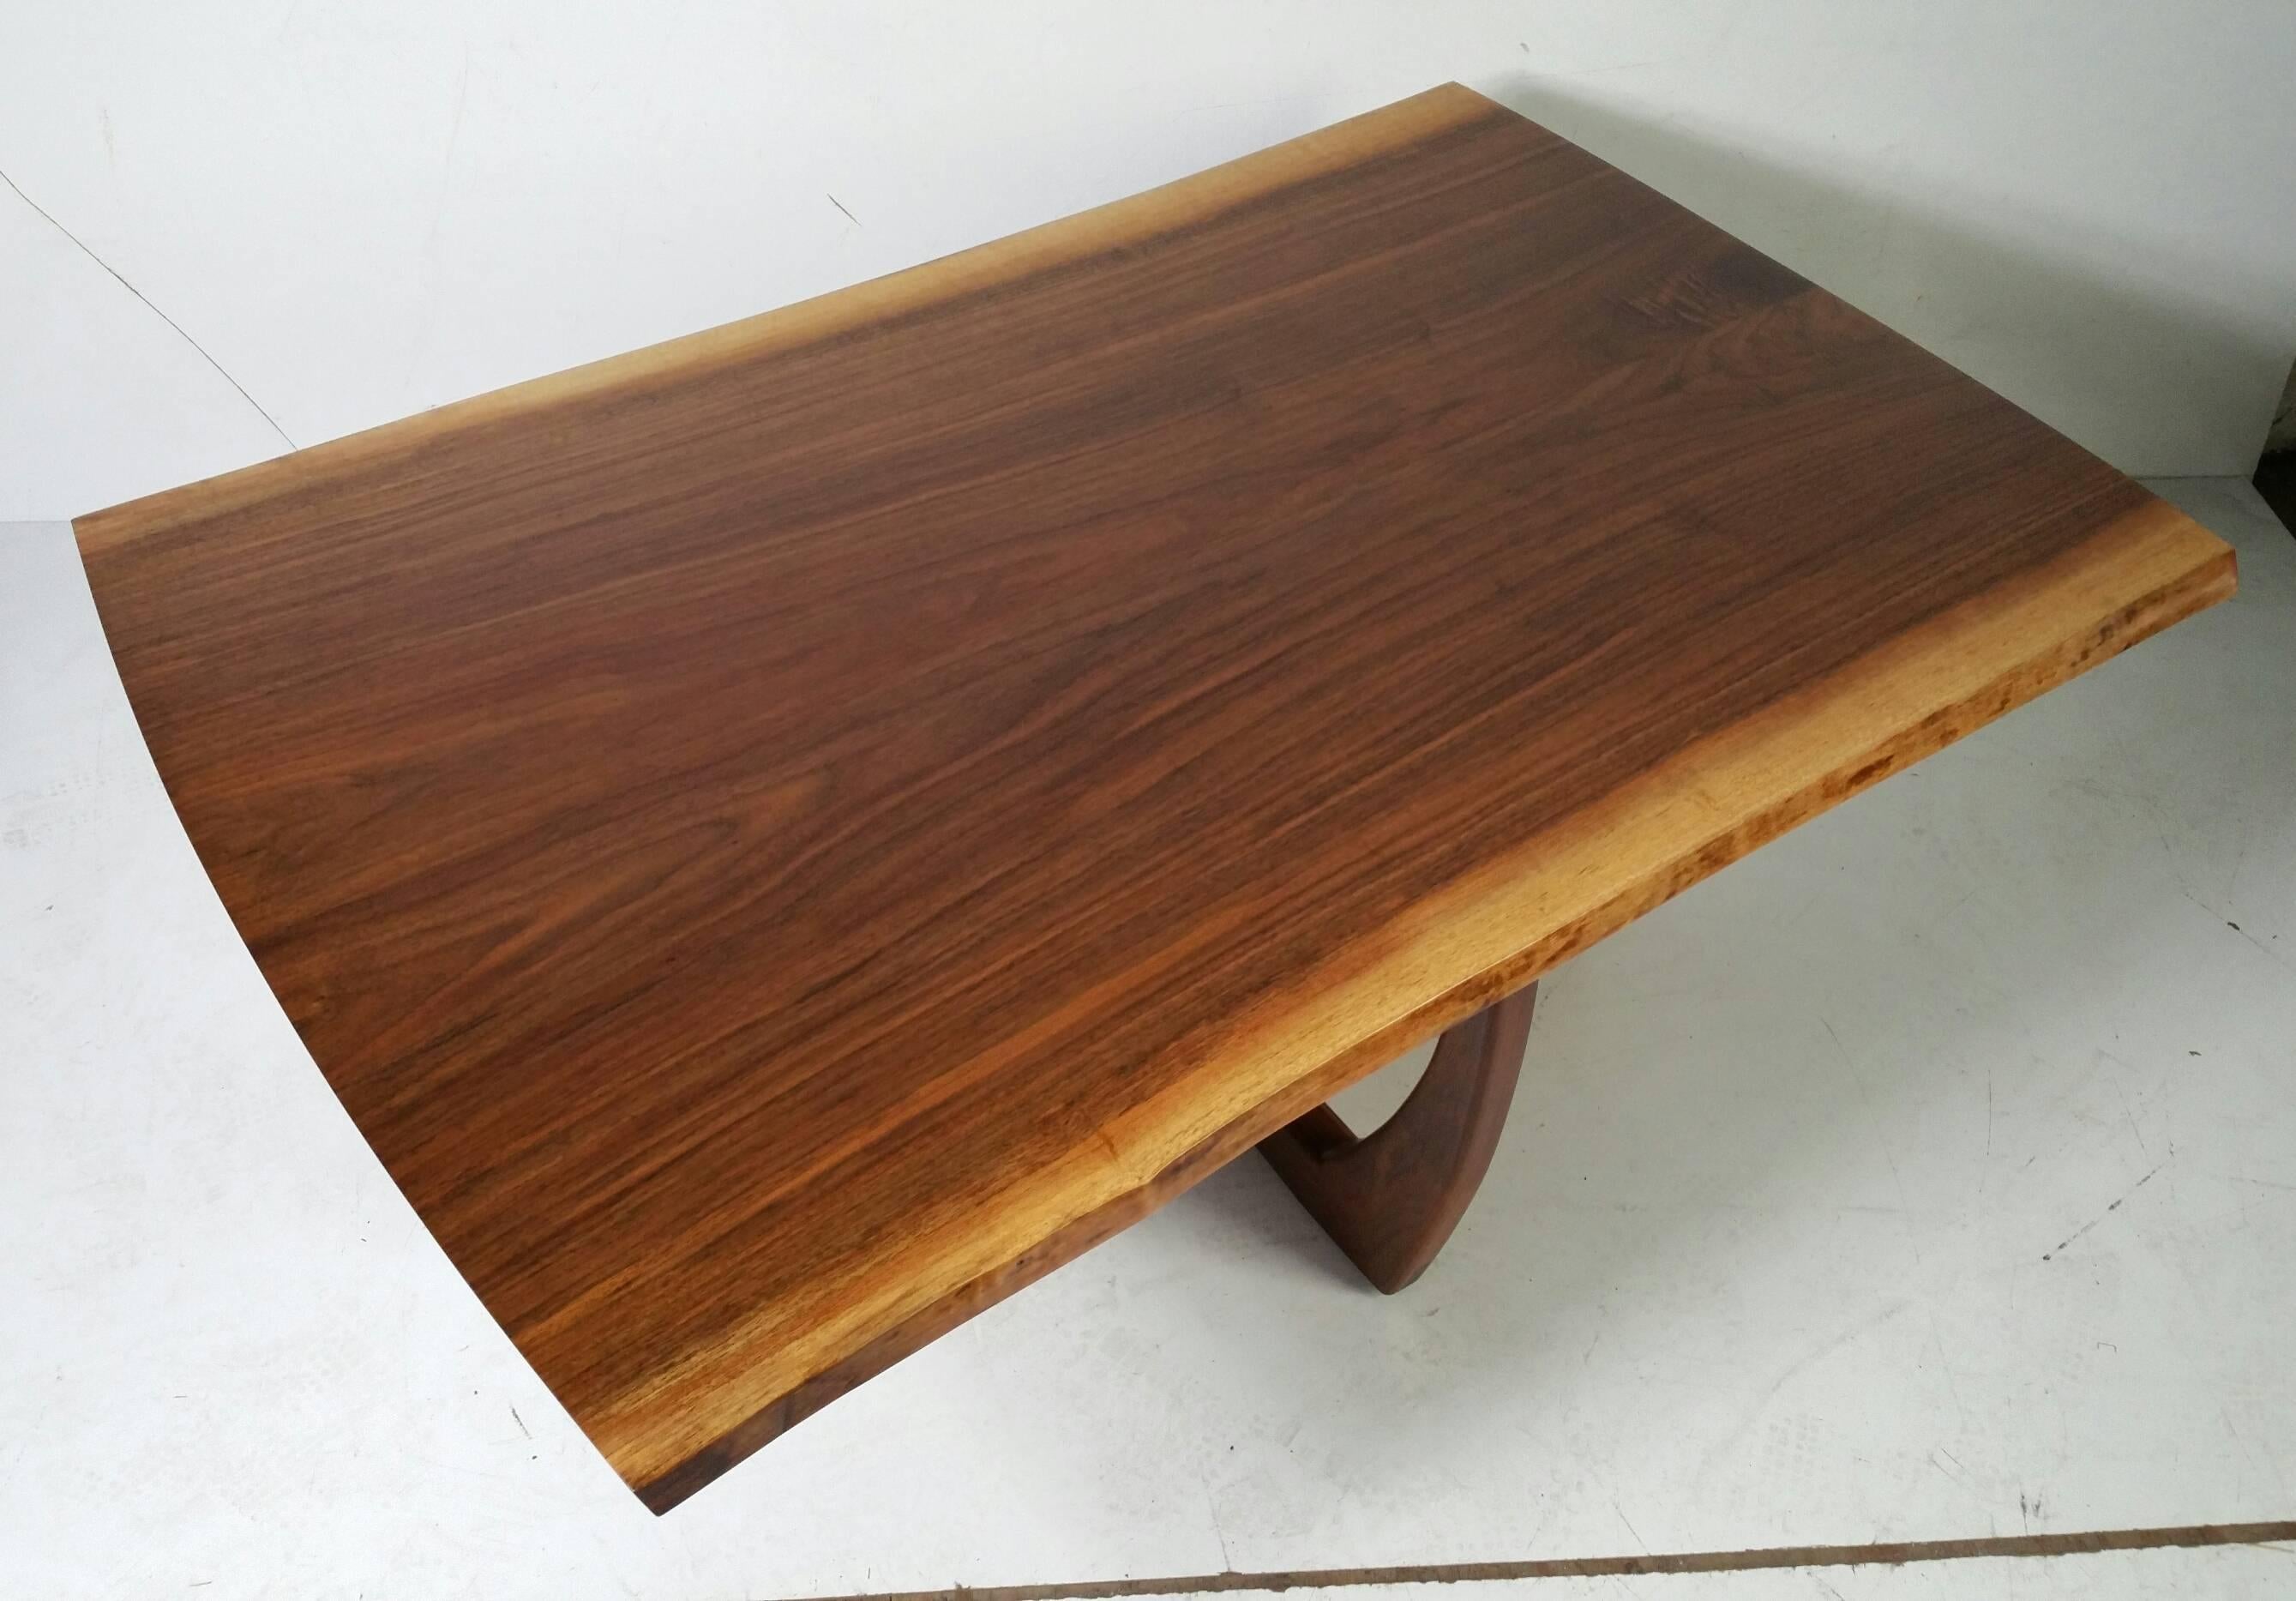 Modernist Free-Edge Figured Walnut Coffee Table, Griff Logan In Excellent Condition For Sale In Buffalo, NY